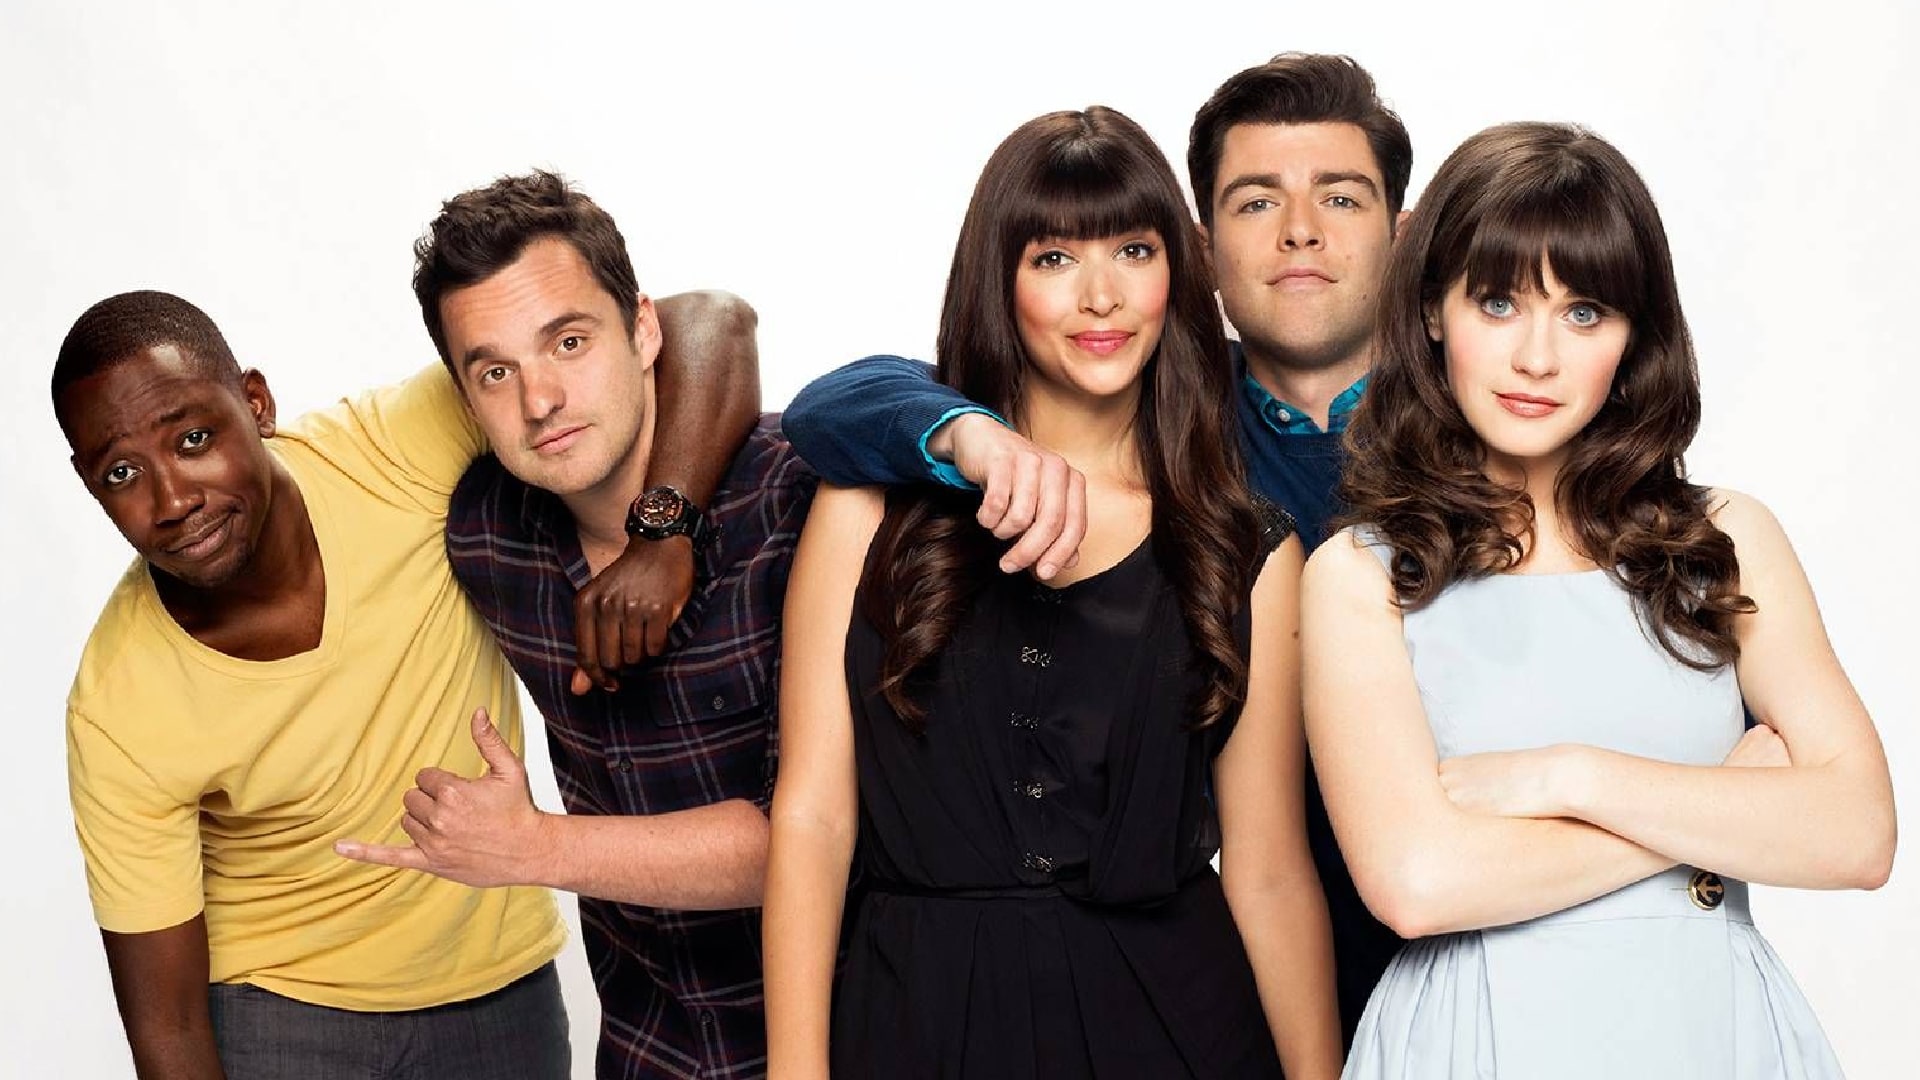 New Girl Facts - 45 New Girl Facts You Haven't Read Before